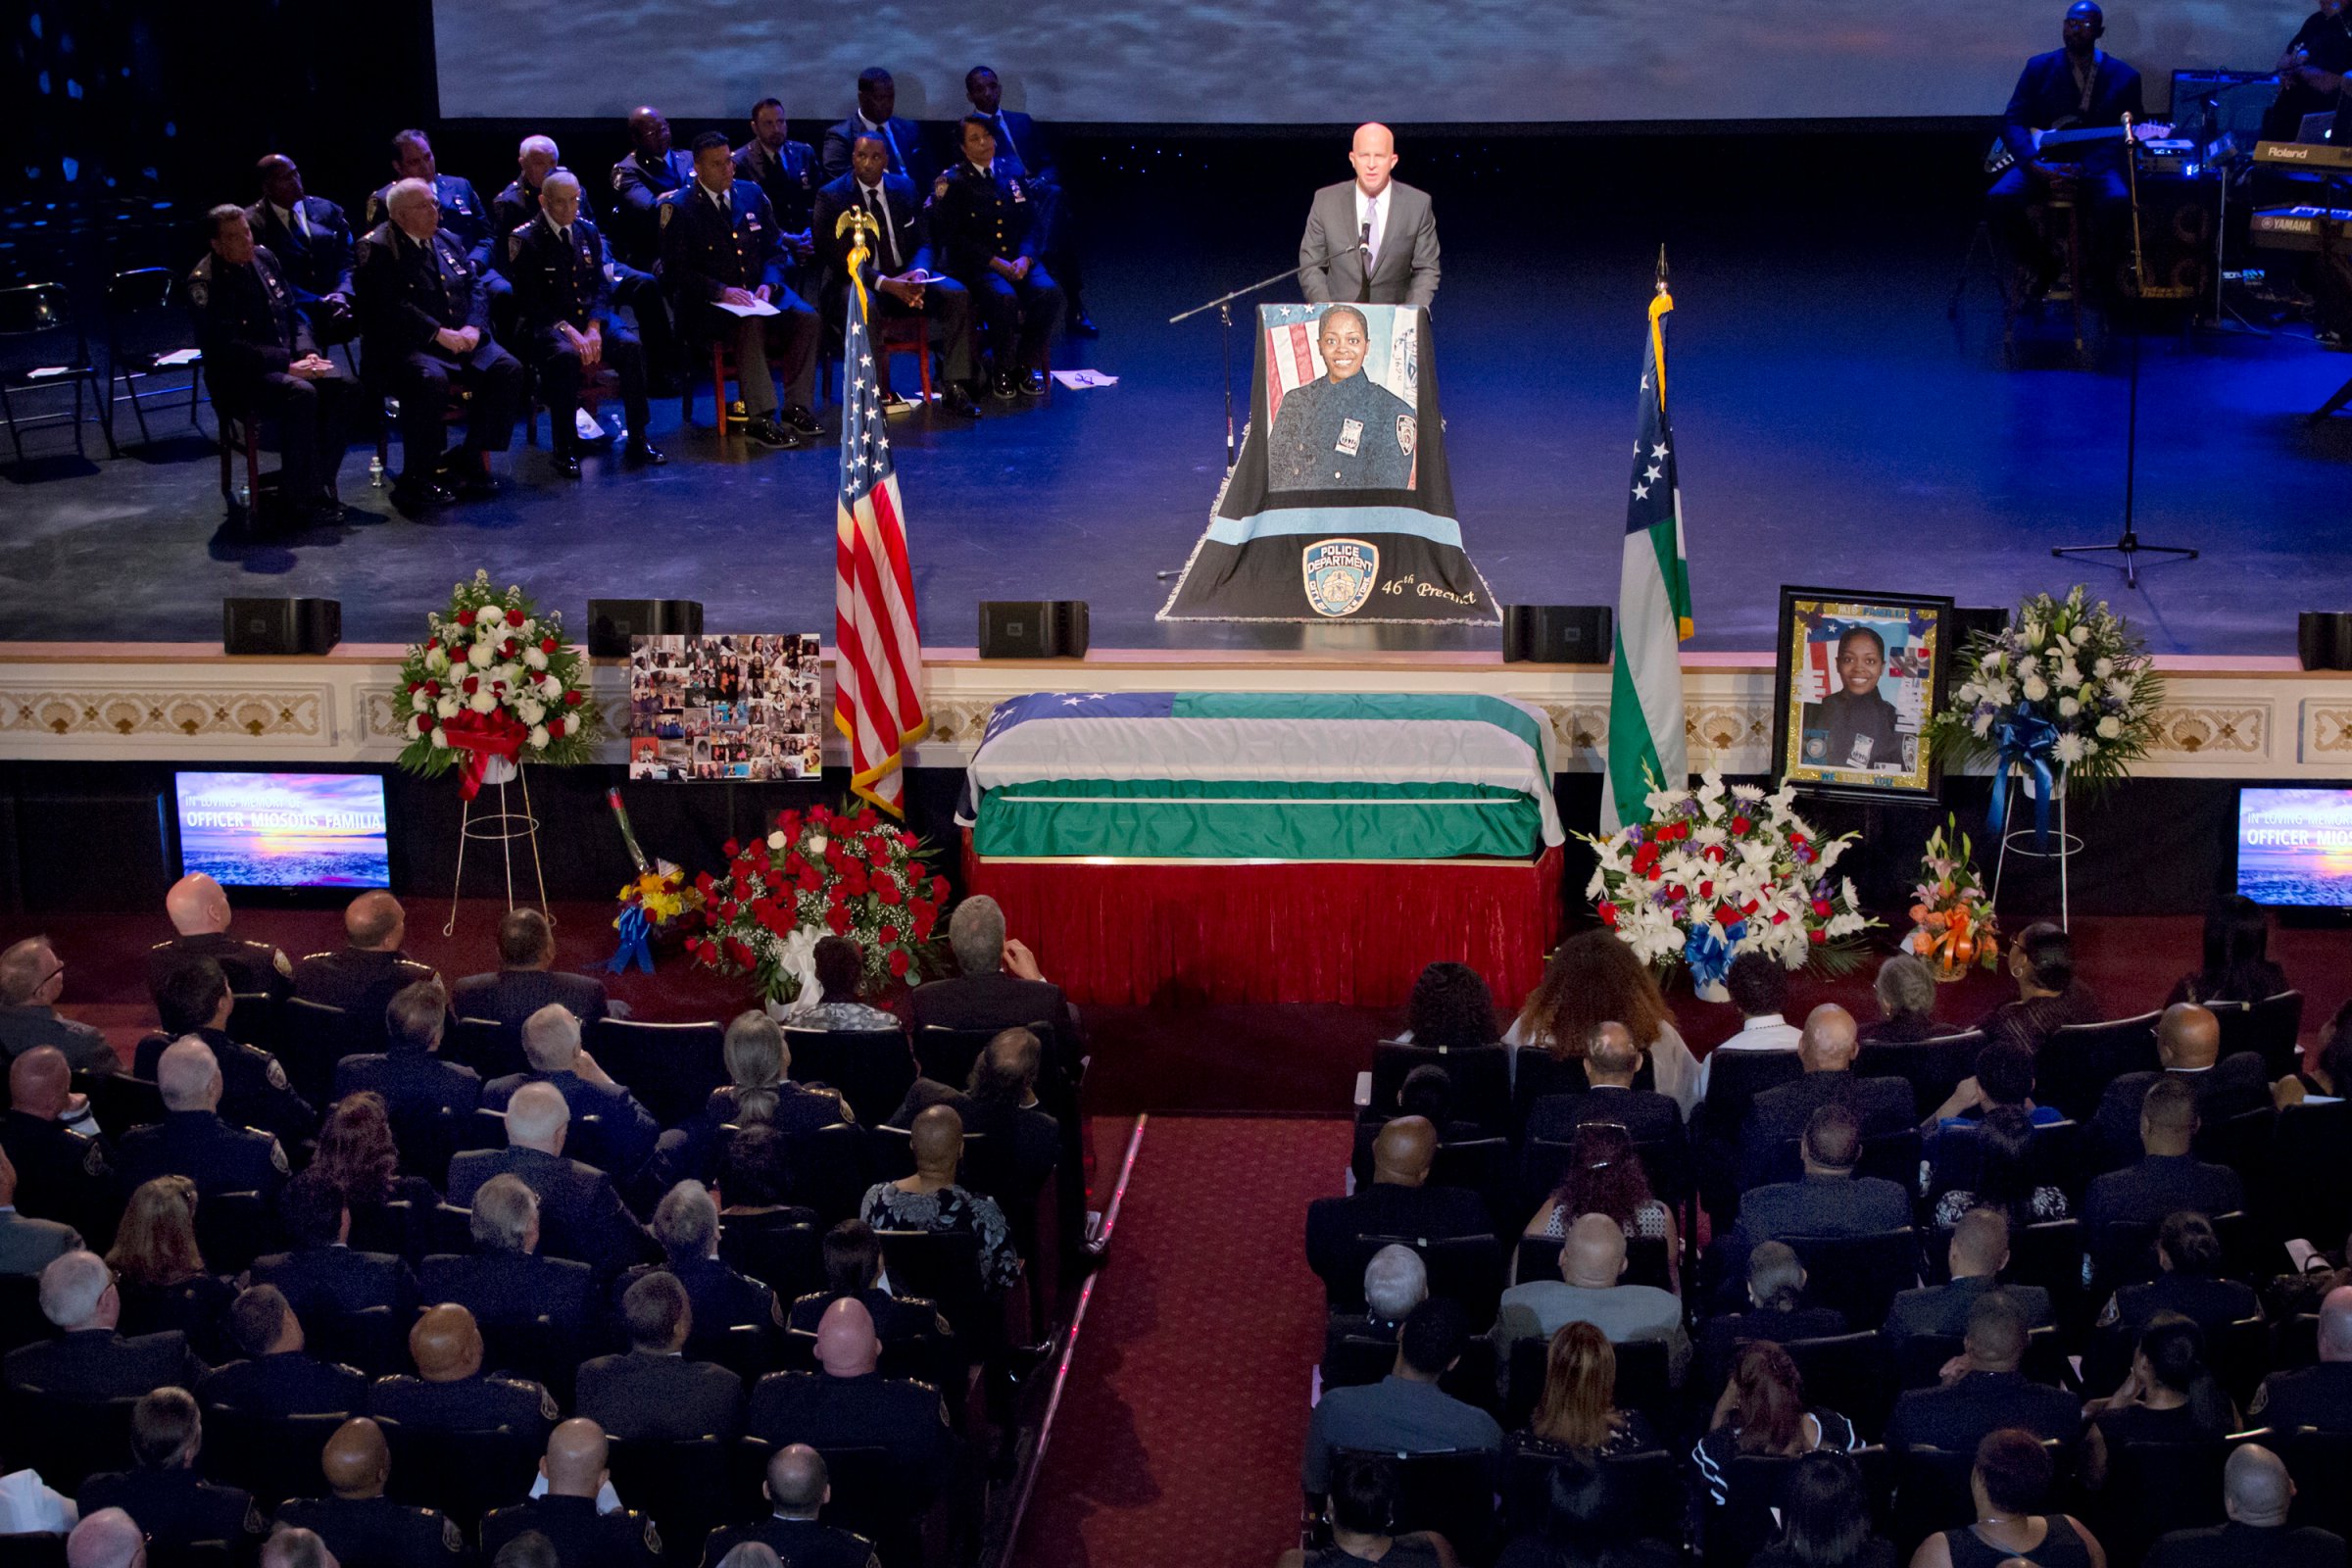 Funeral Held For NYPD Officer Slain While On Duty In The Bronx